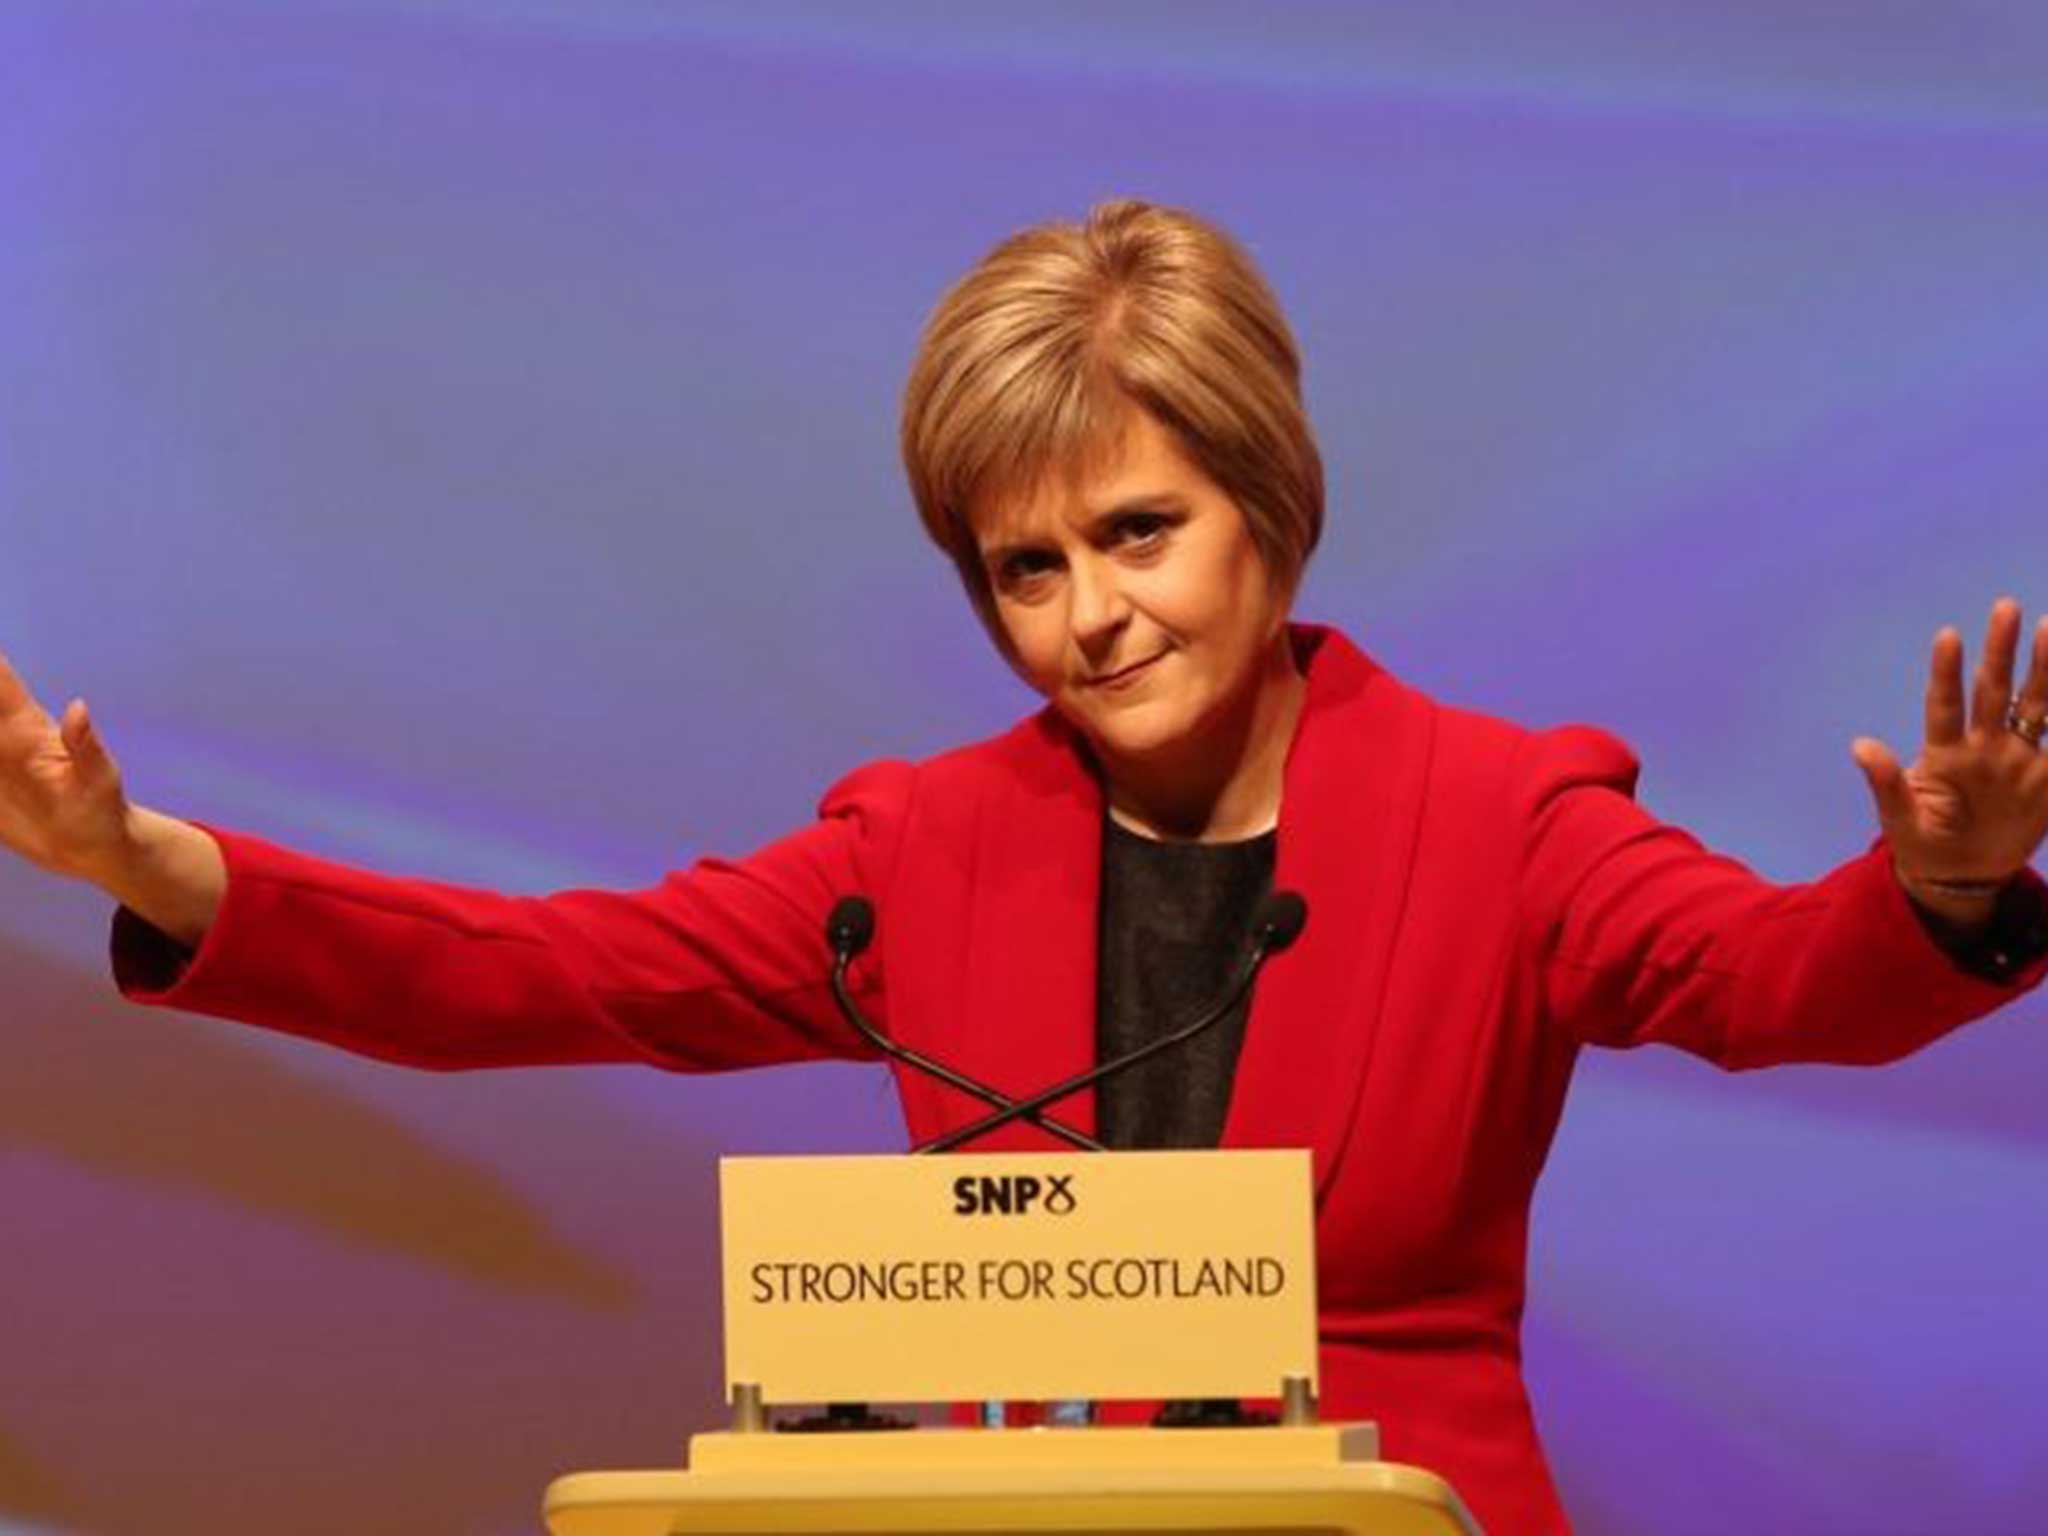 Nicola Sturgeon gives her first speech as leader of the SNP